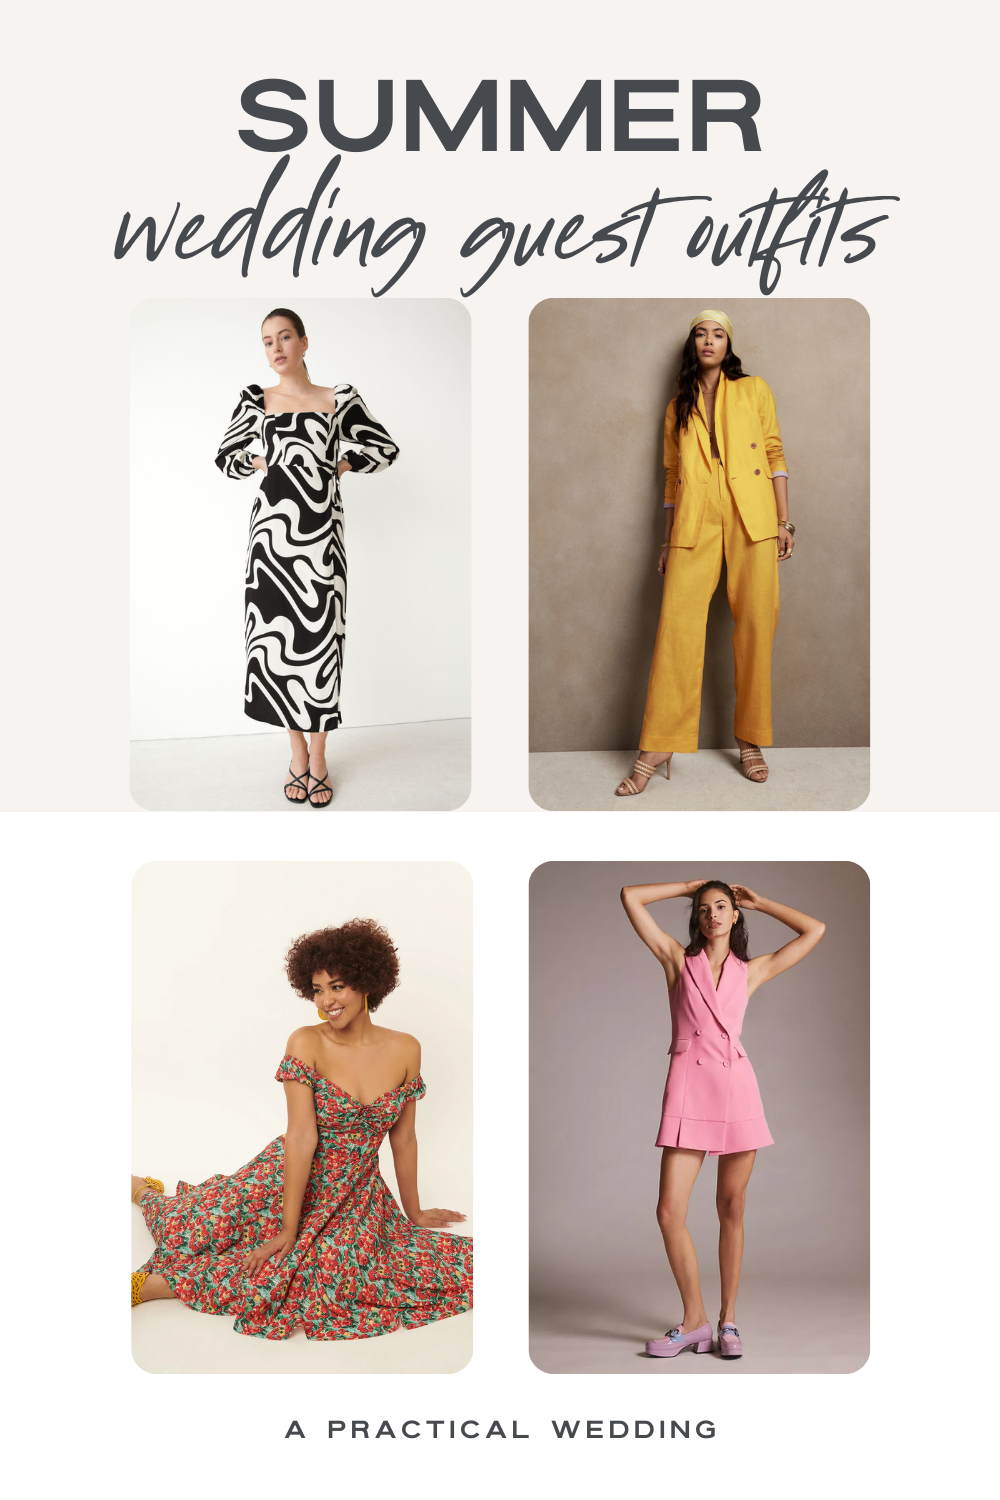 summer wedding guest outfits graphic